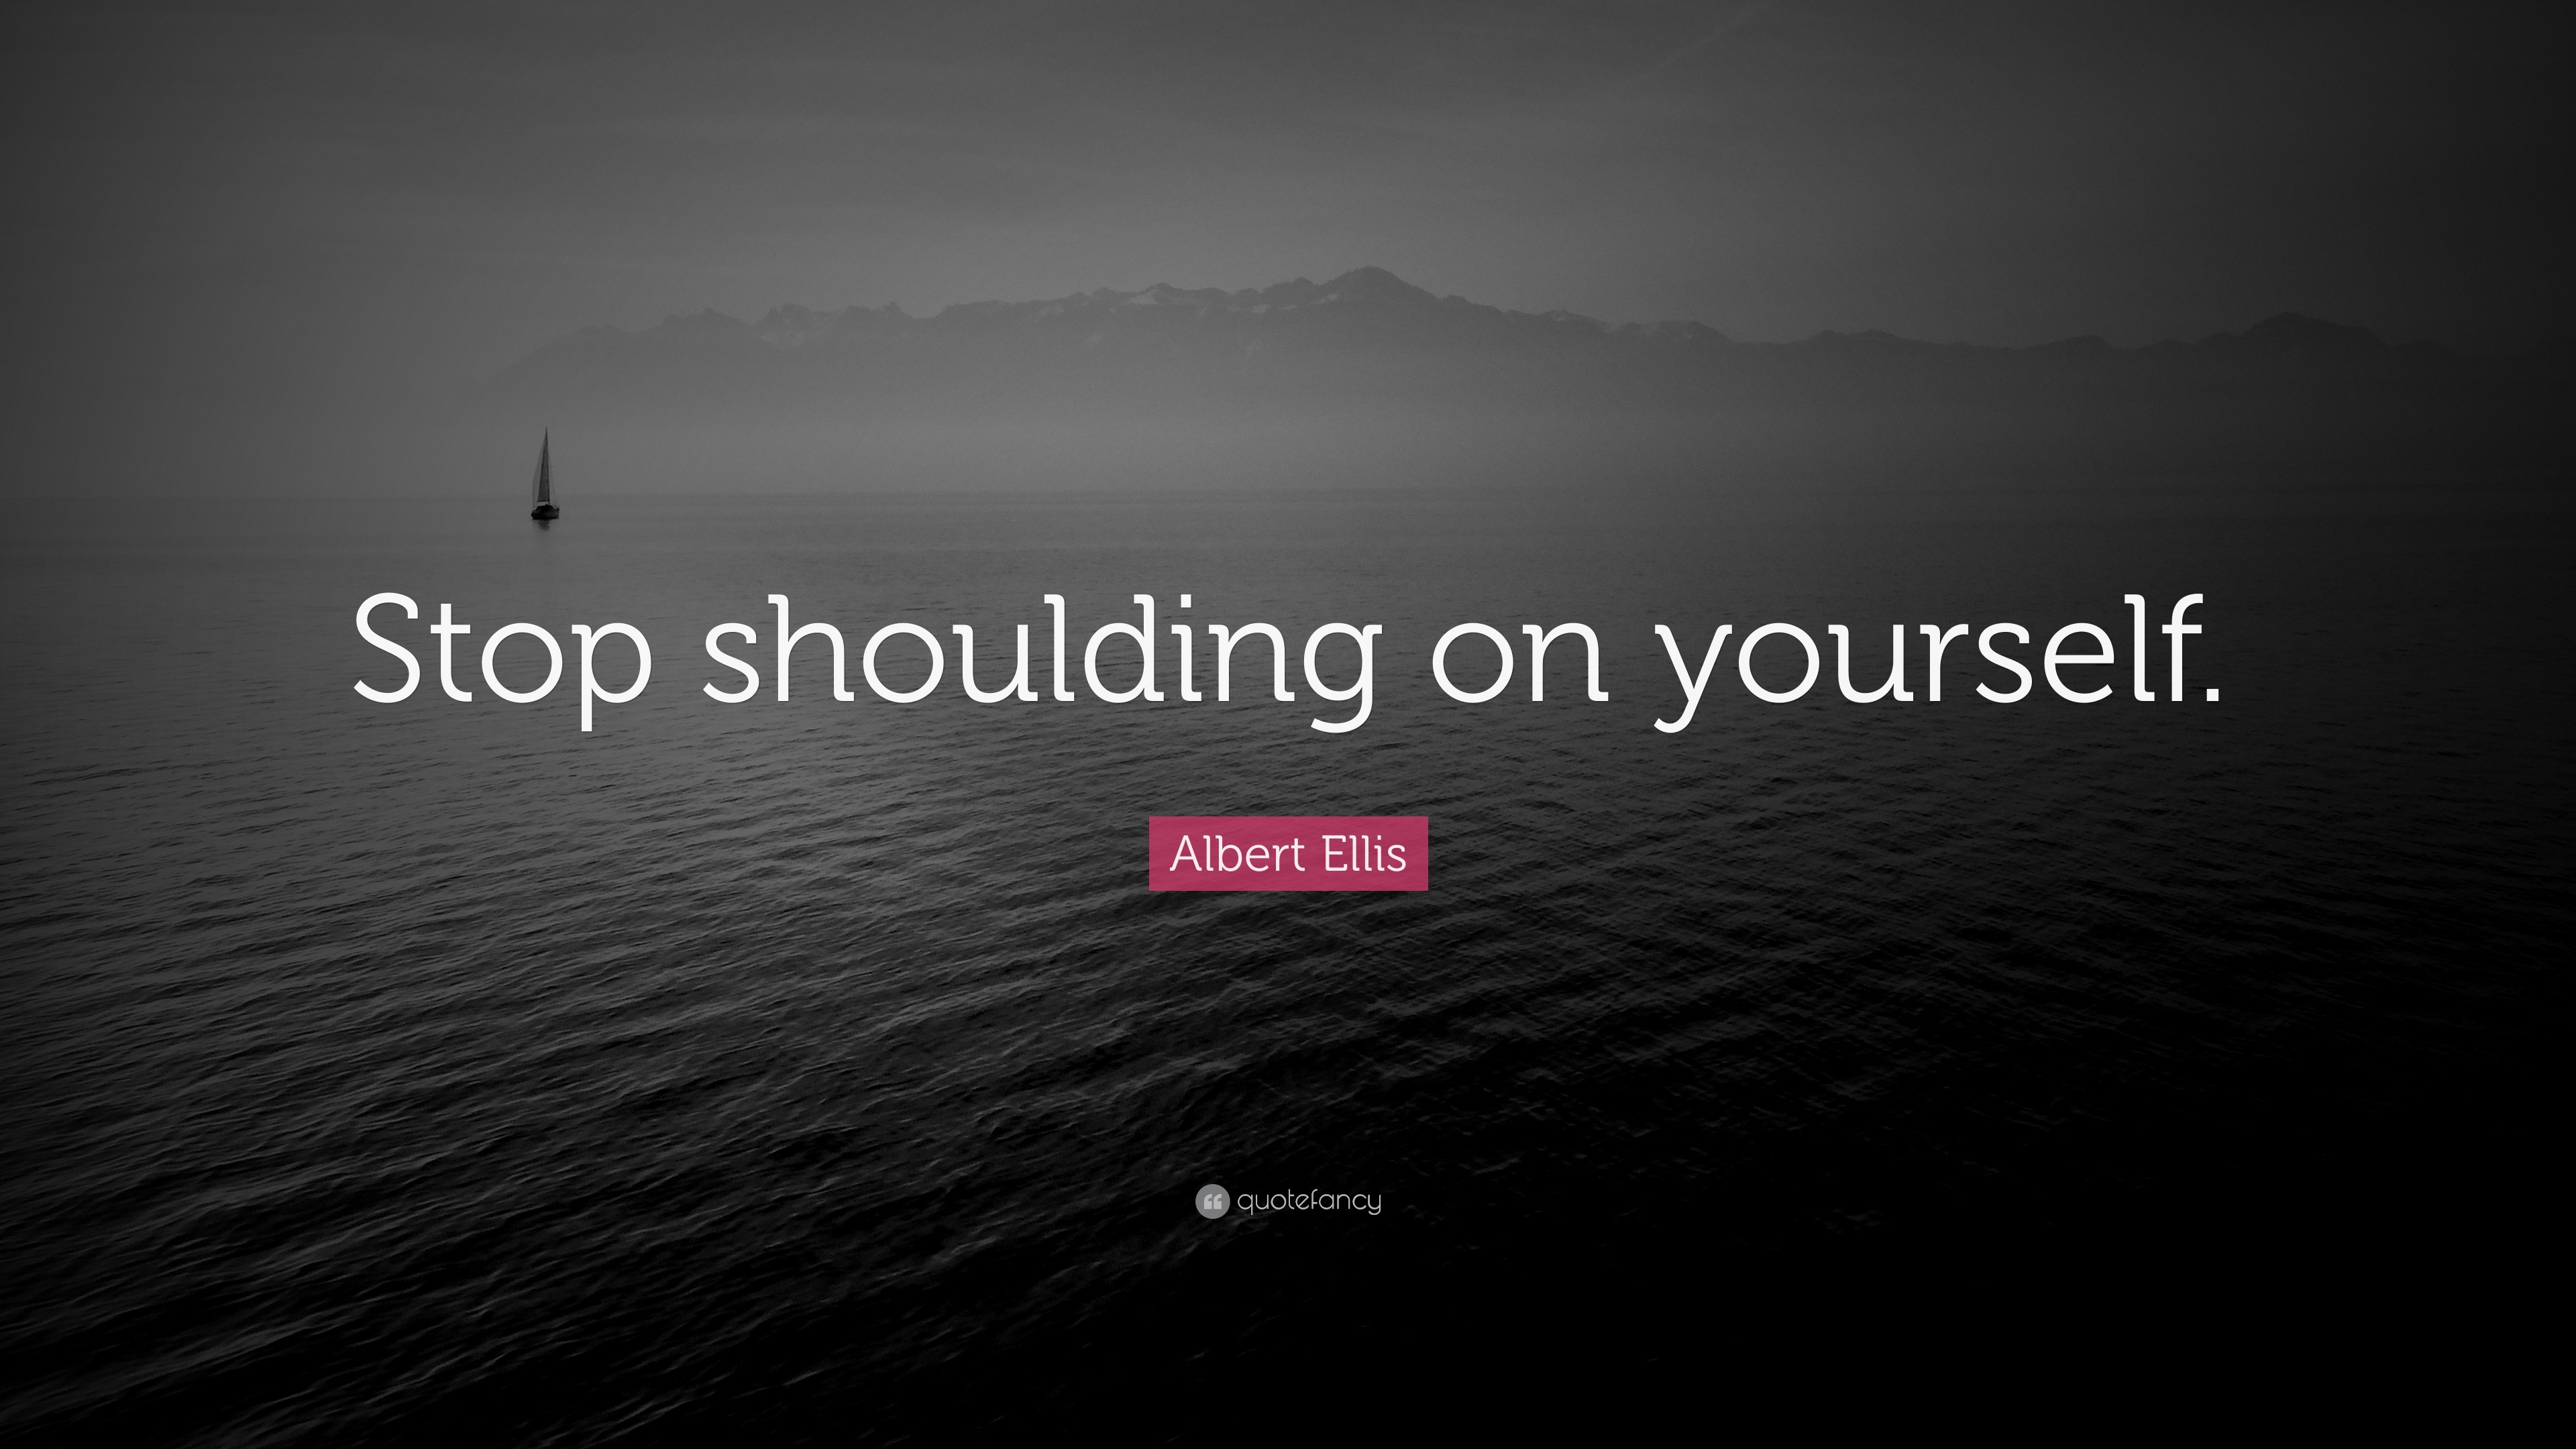 How to Stop Shoulding Yourself